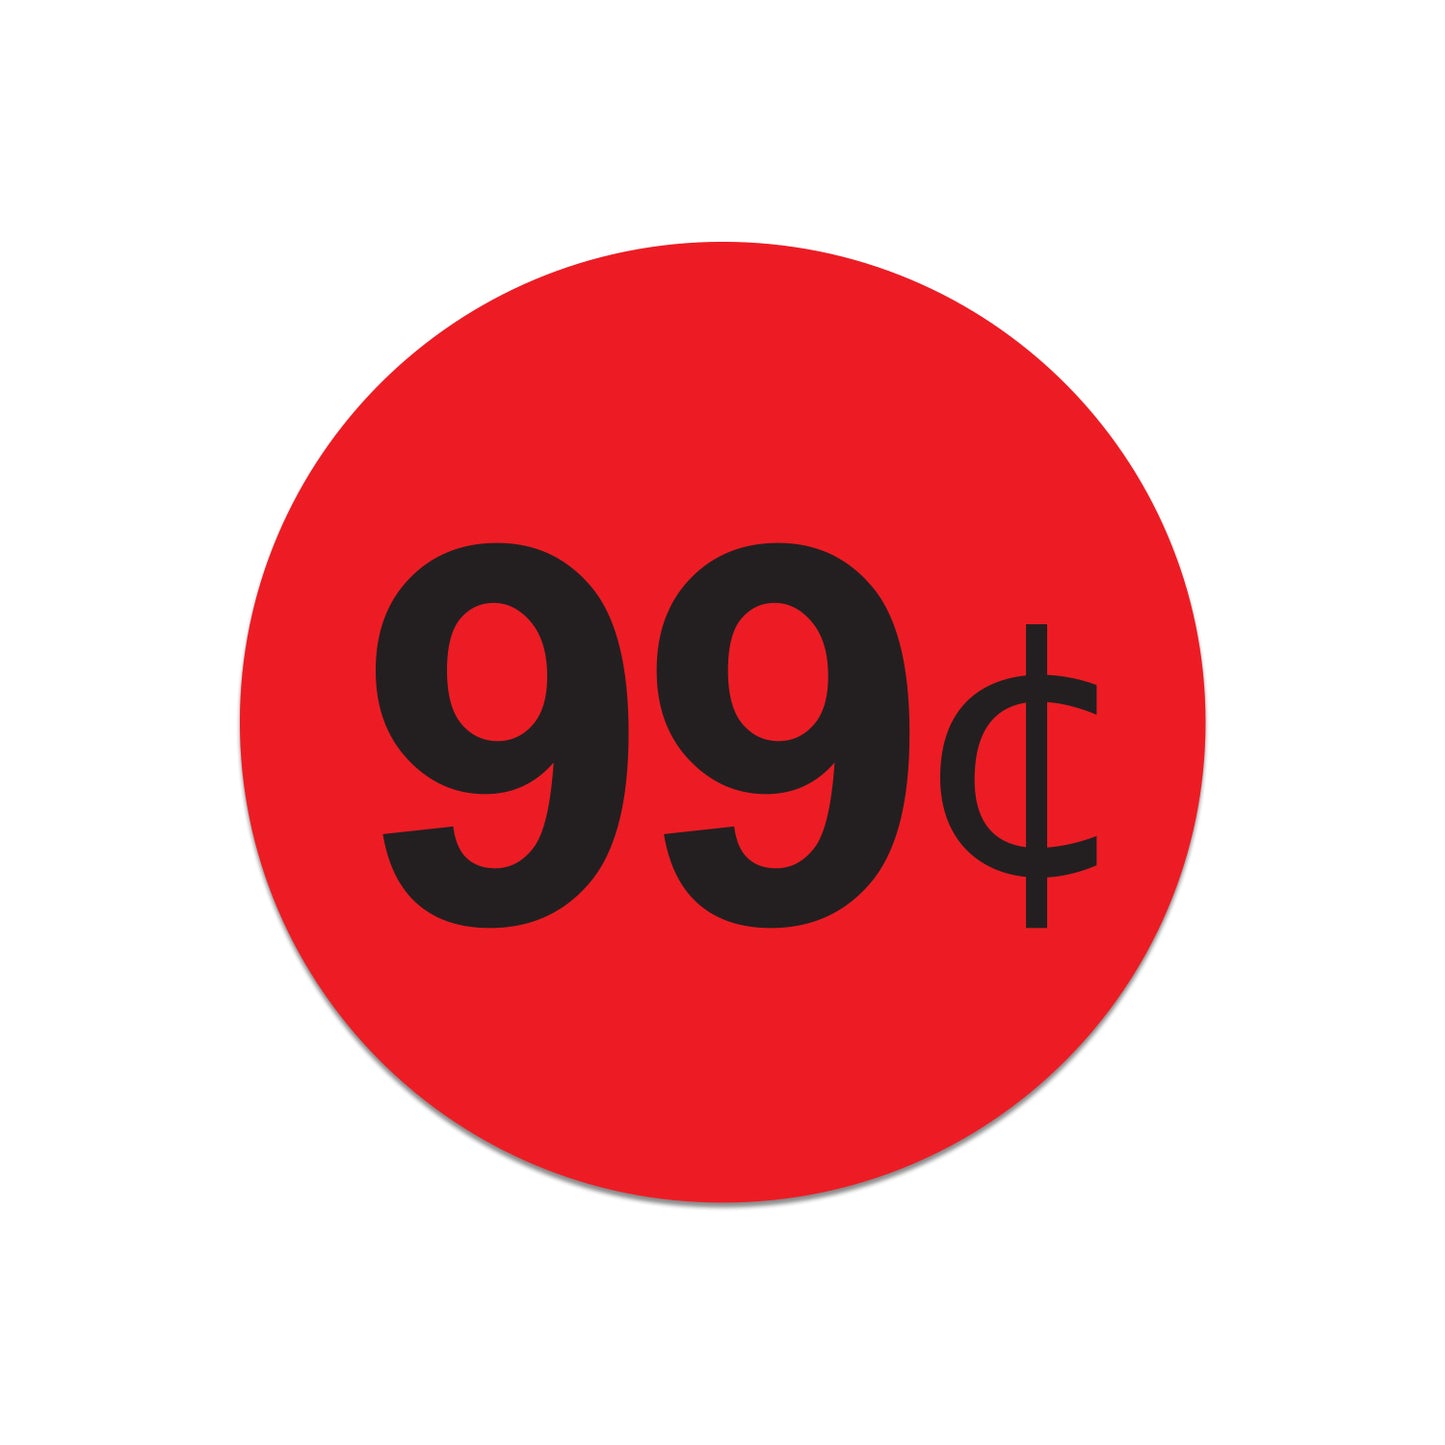 1 inch | Retail & Pricing: 99 ¢ 99 Cents Stickers